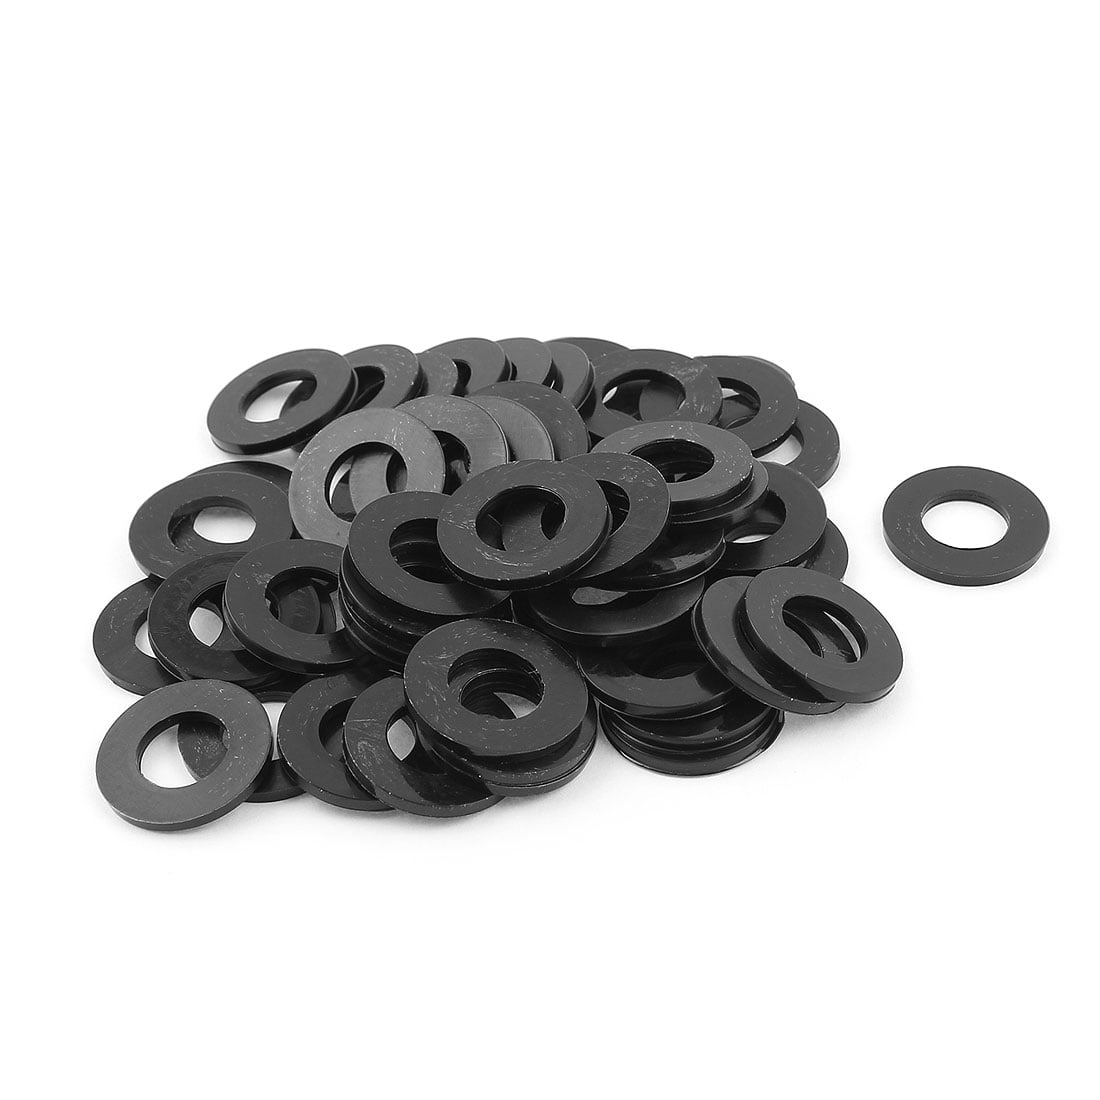 12mm ID 8mm thick spacer stand off steel 14mm OD bags of 2 